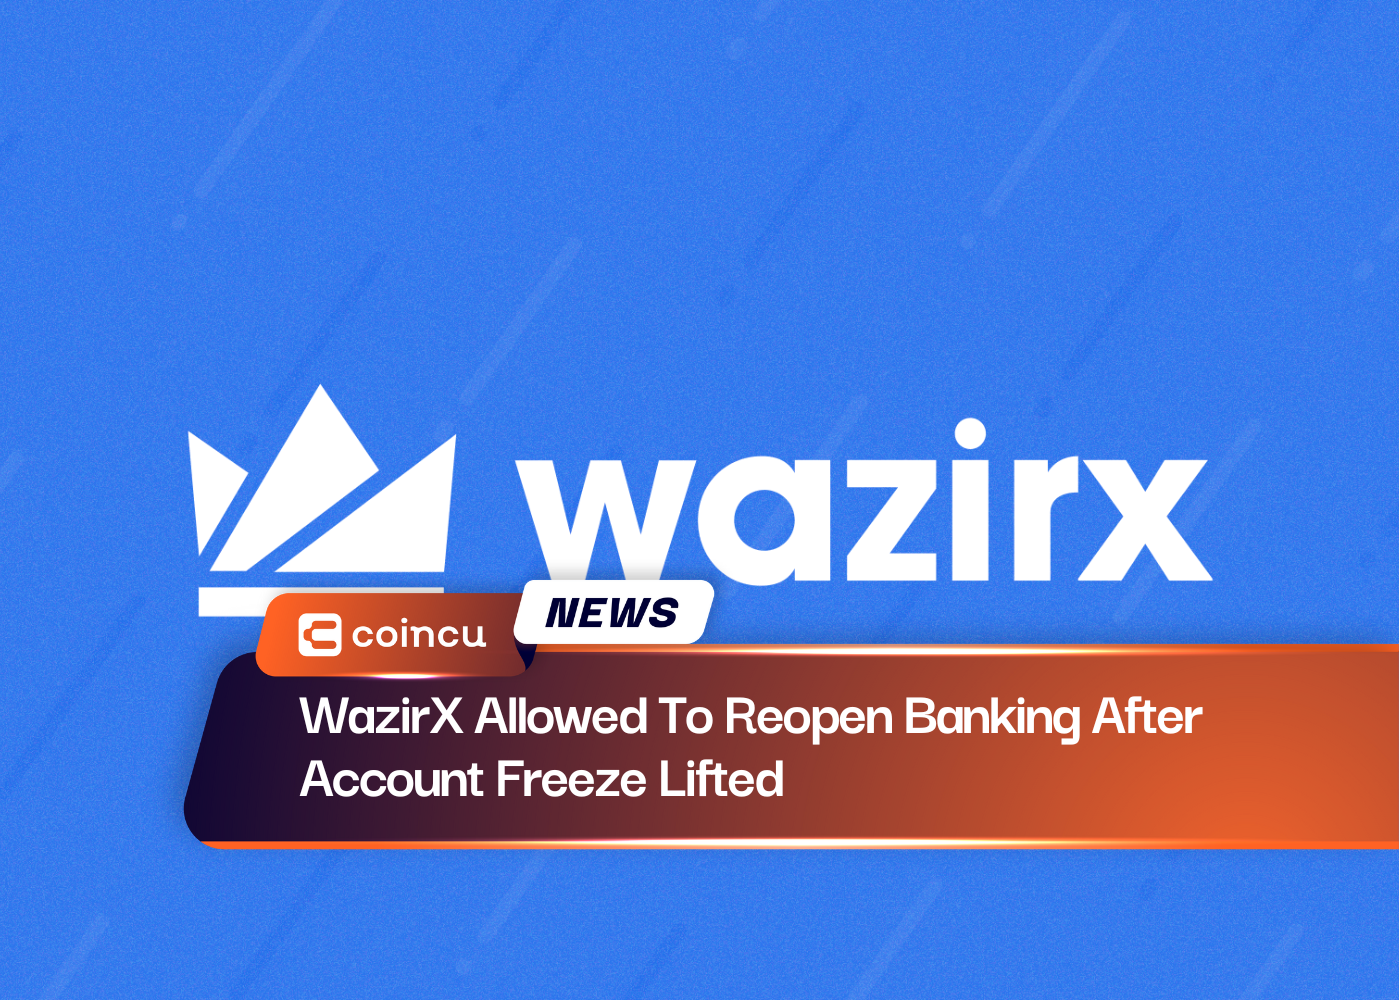 WazirX Allowed To Reopen Banking After Account Freeze Lifted